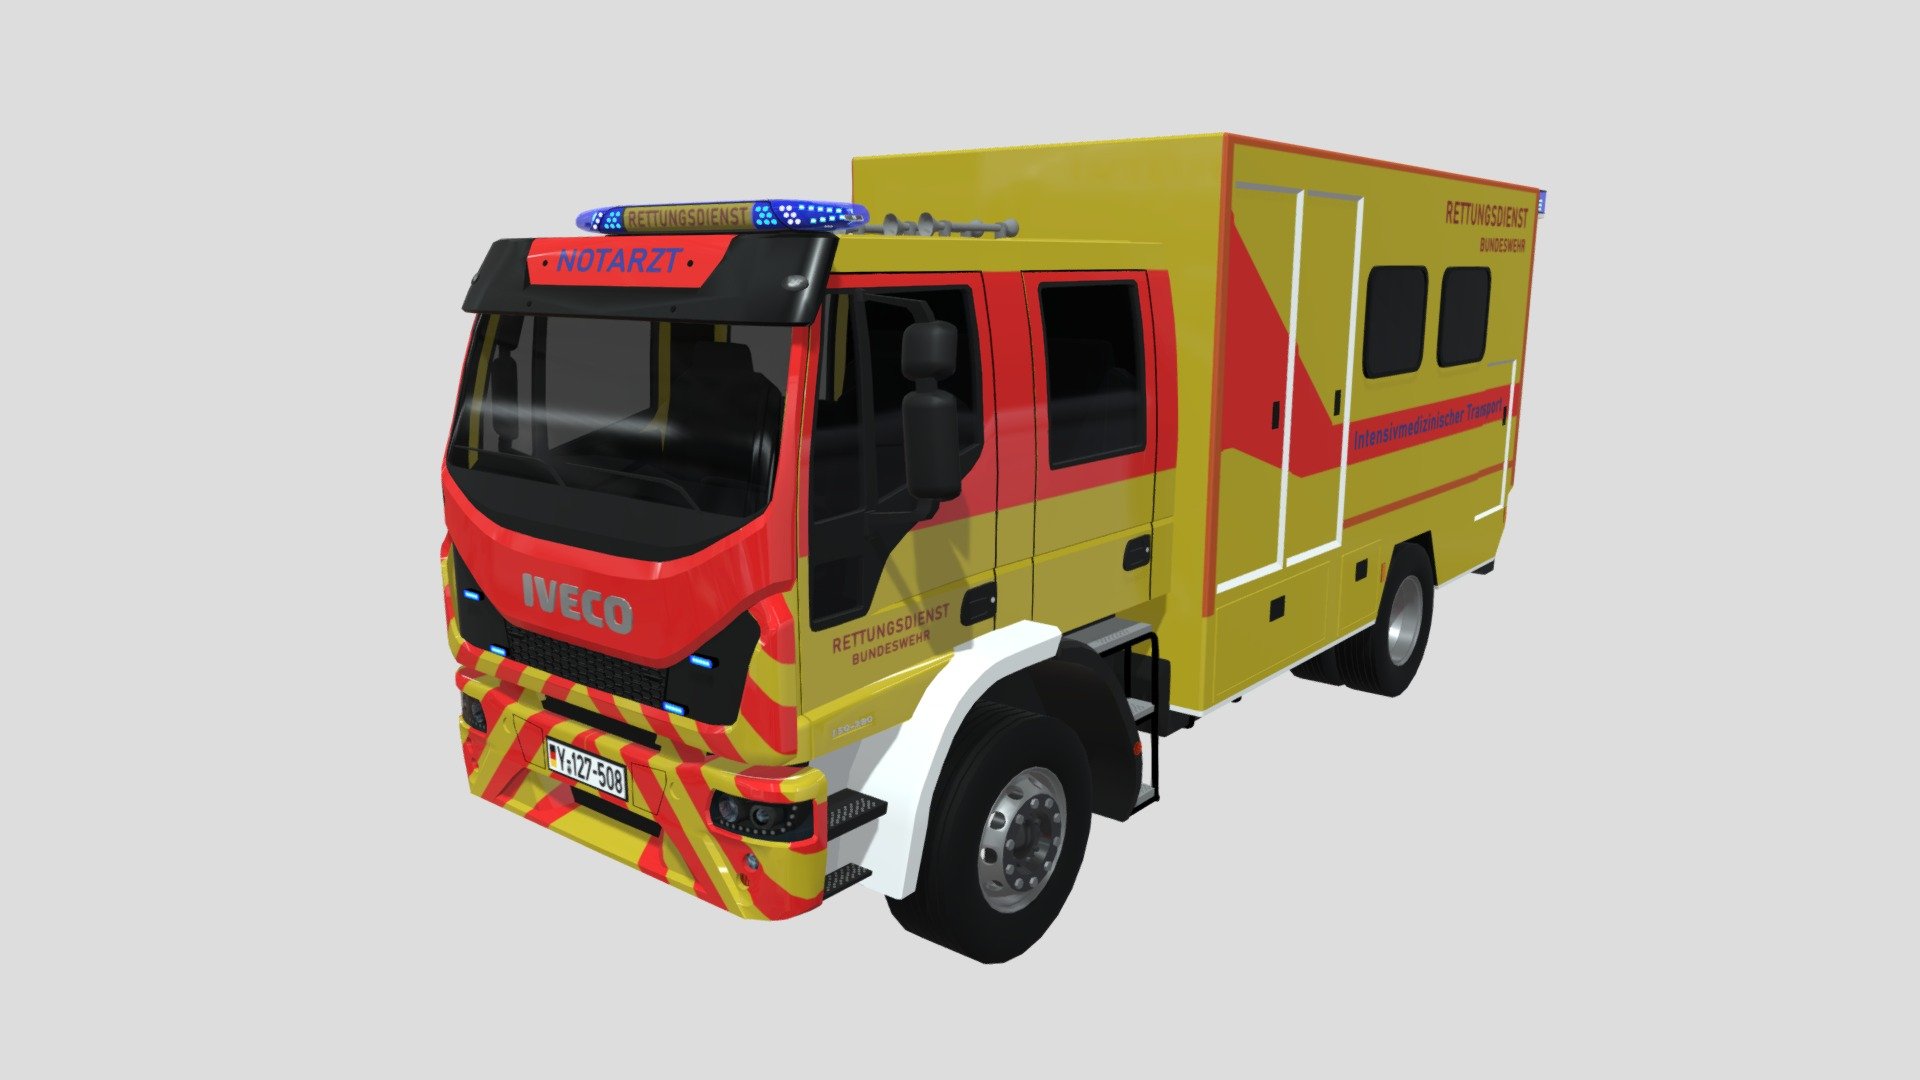 Iveco Eurocargo Rettungsdienst Intensivtransportwagen 3D Model

-Model have interior

-Optimized shading for Renders

-Perfect for games and advertisements or animations

-Ready to use on Unreal Engine, Zmodeler, Unity or any other game engine platform or 3d model platform

-Include materials

-Made in Blender - Iveco Eurocargo Rettungsdienst - 3D model by Xcelsior Modeling & Design (@4L3X4NDR3_LEX) 3d model